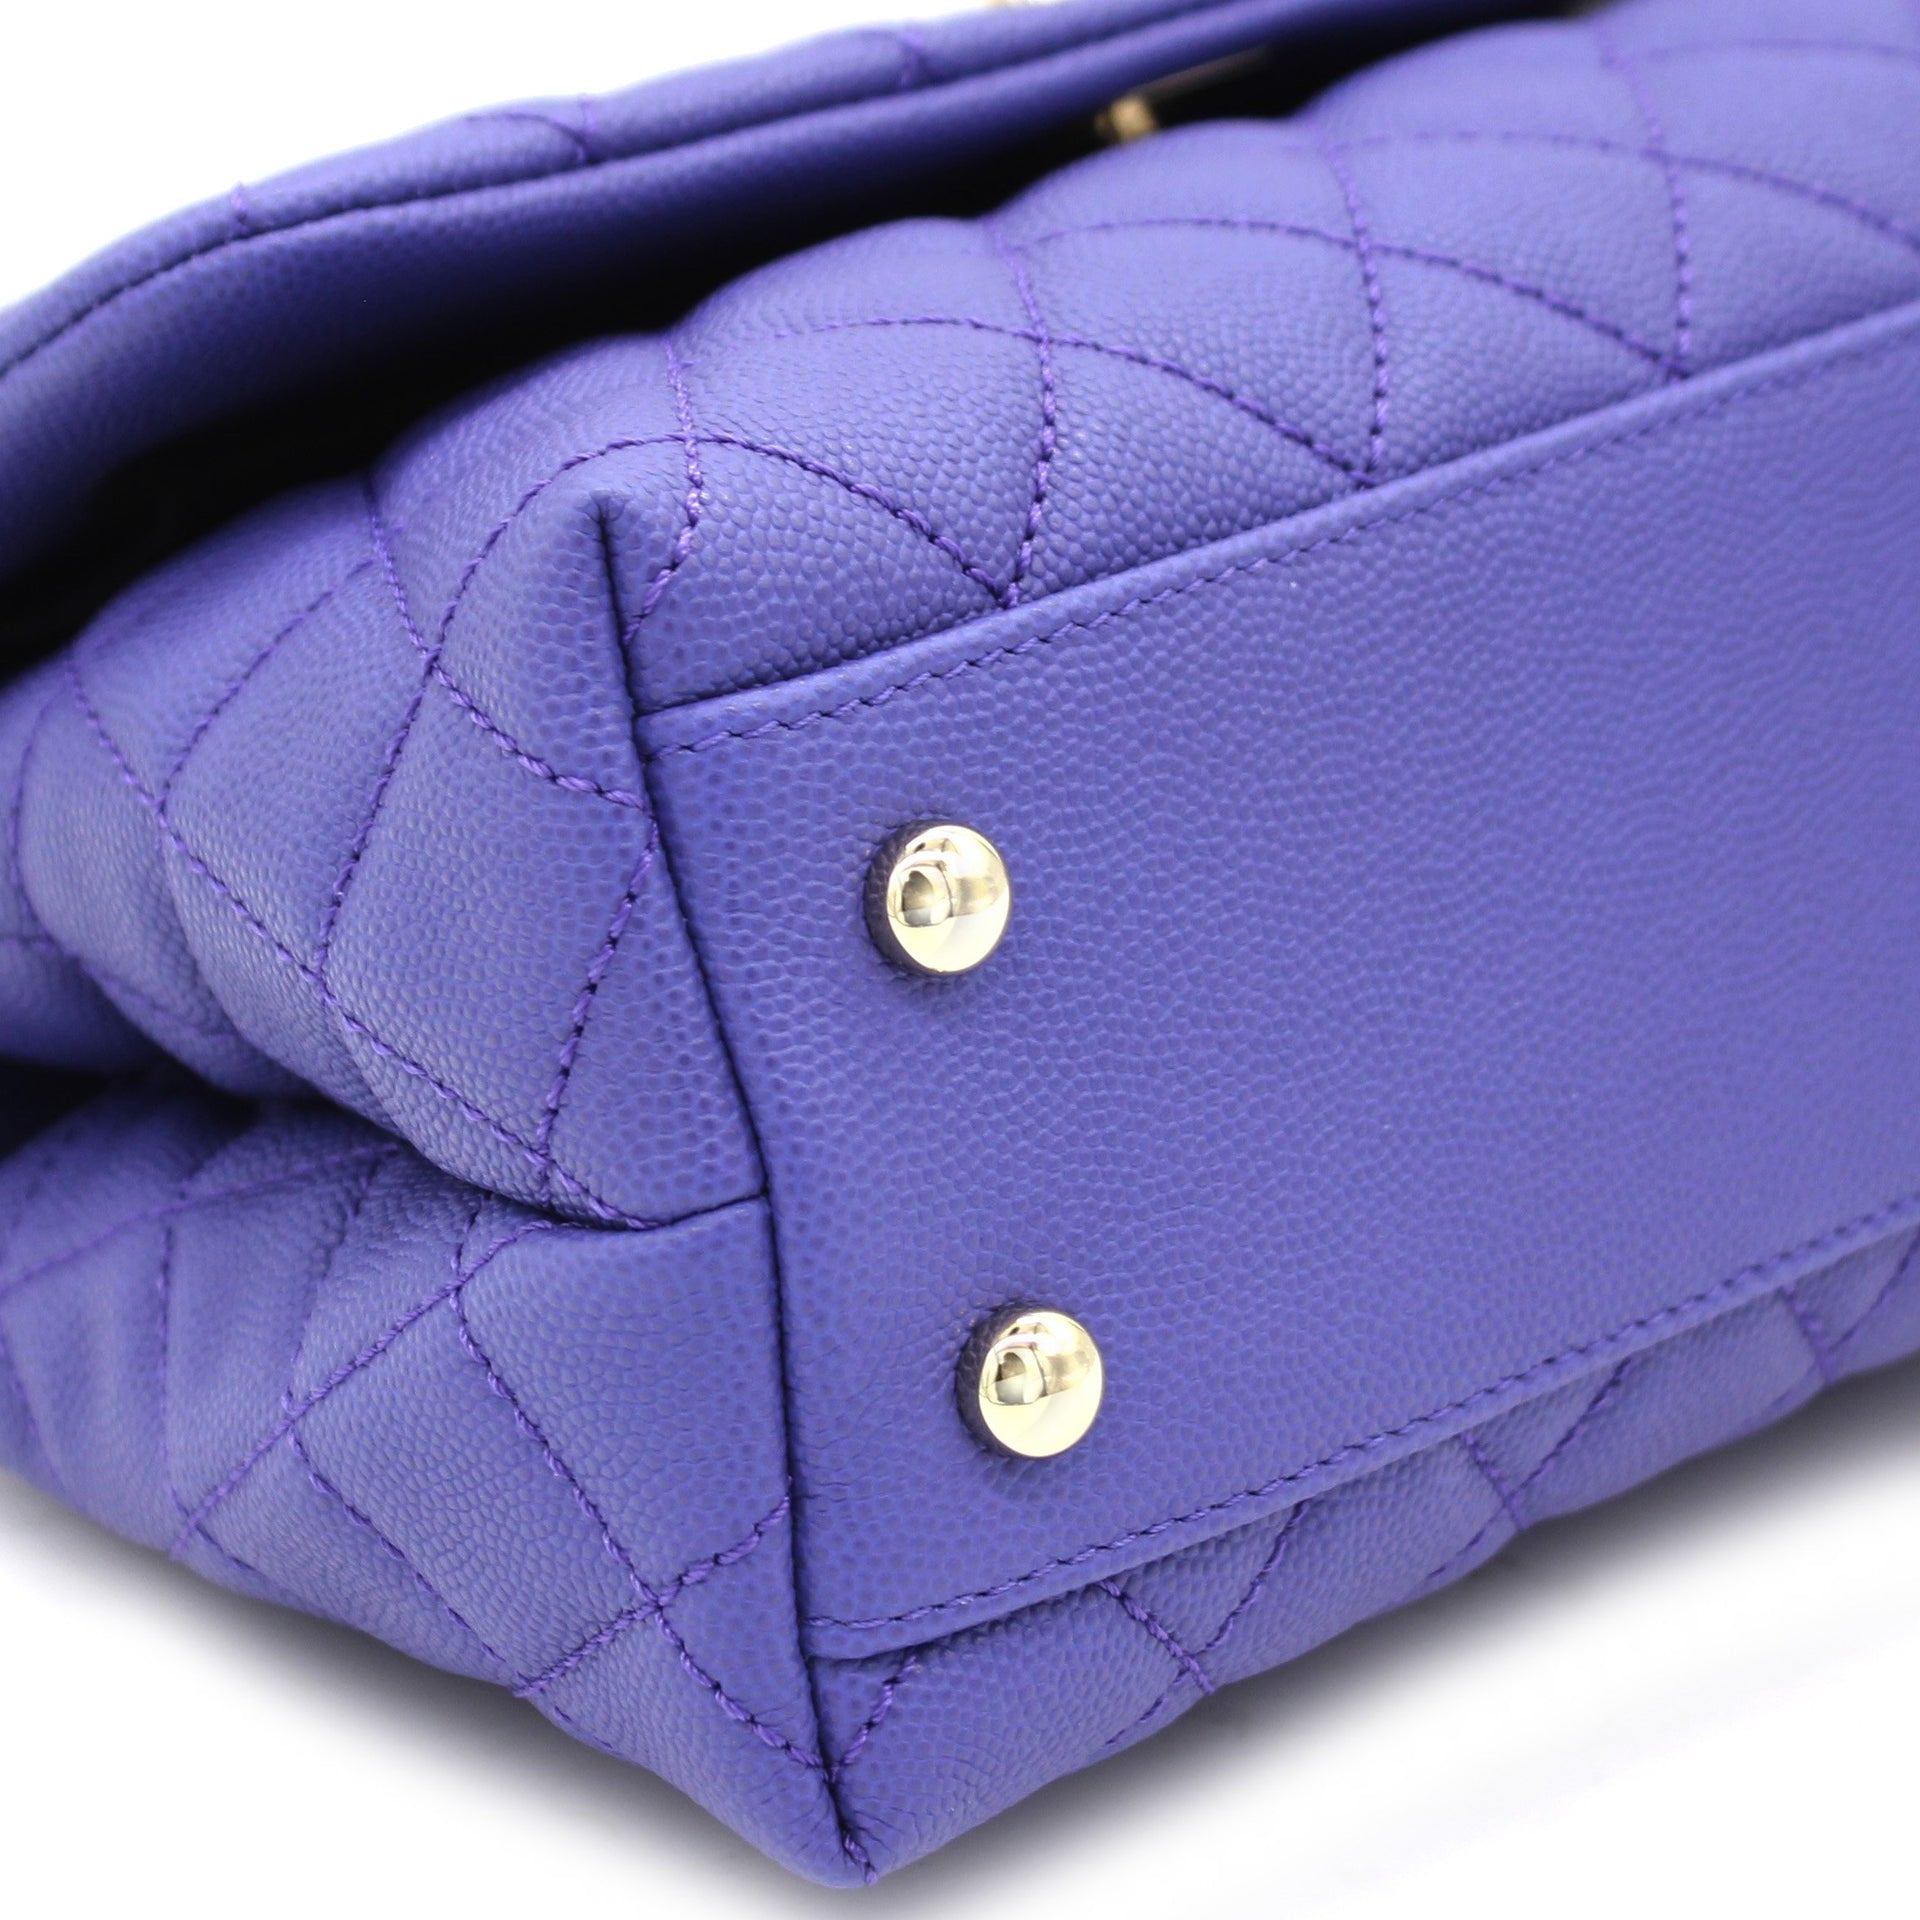 Purple Quilted Caviar Leather Small Handle Coco Flap Bag